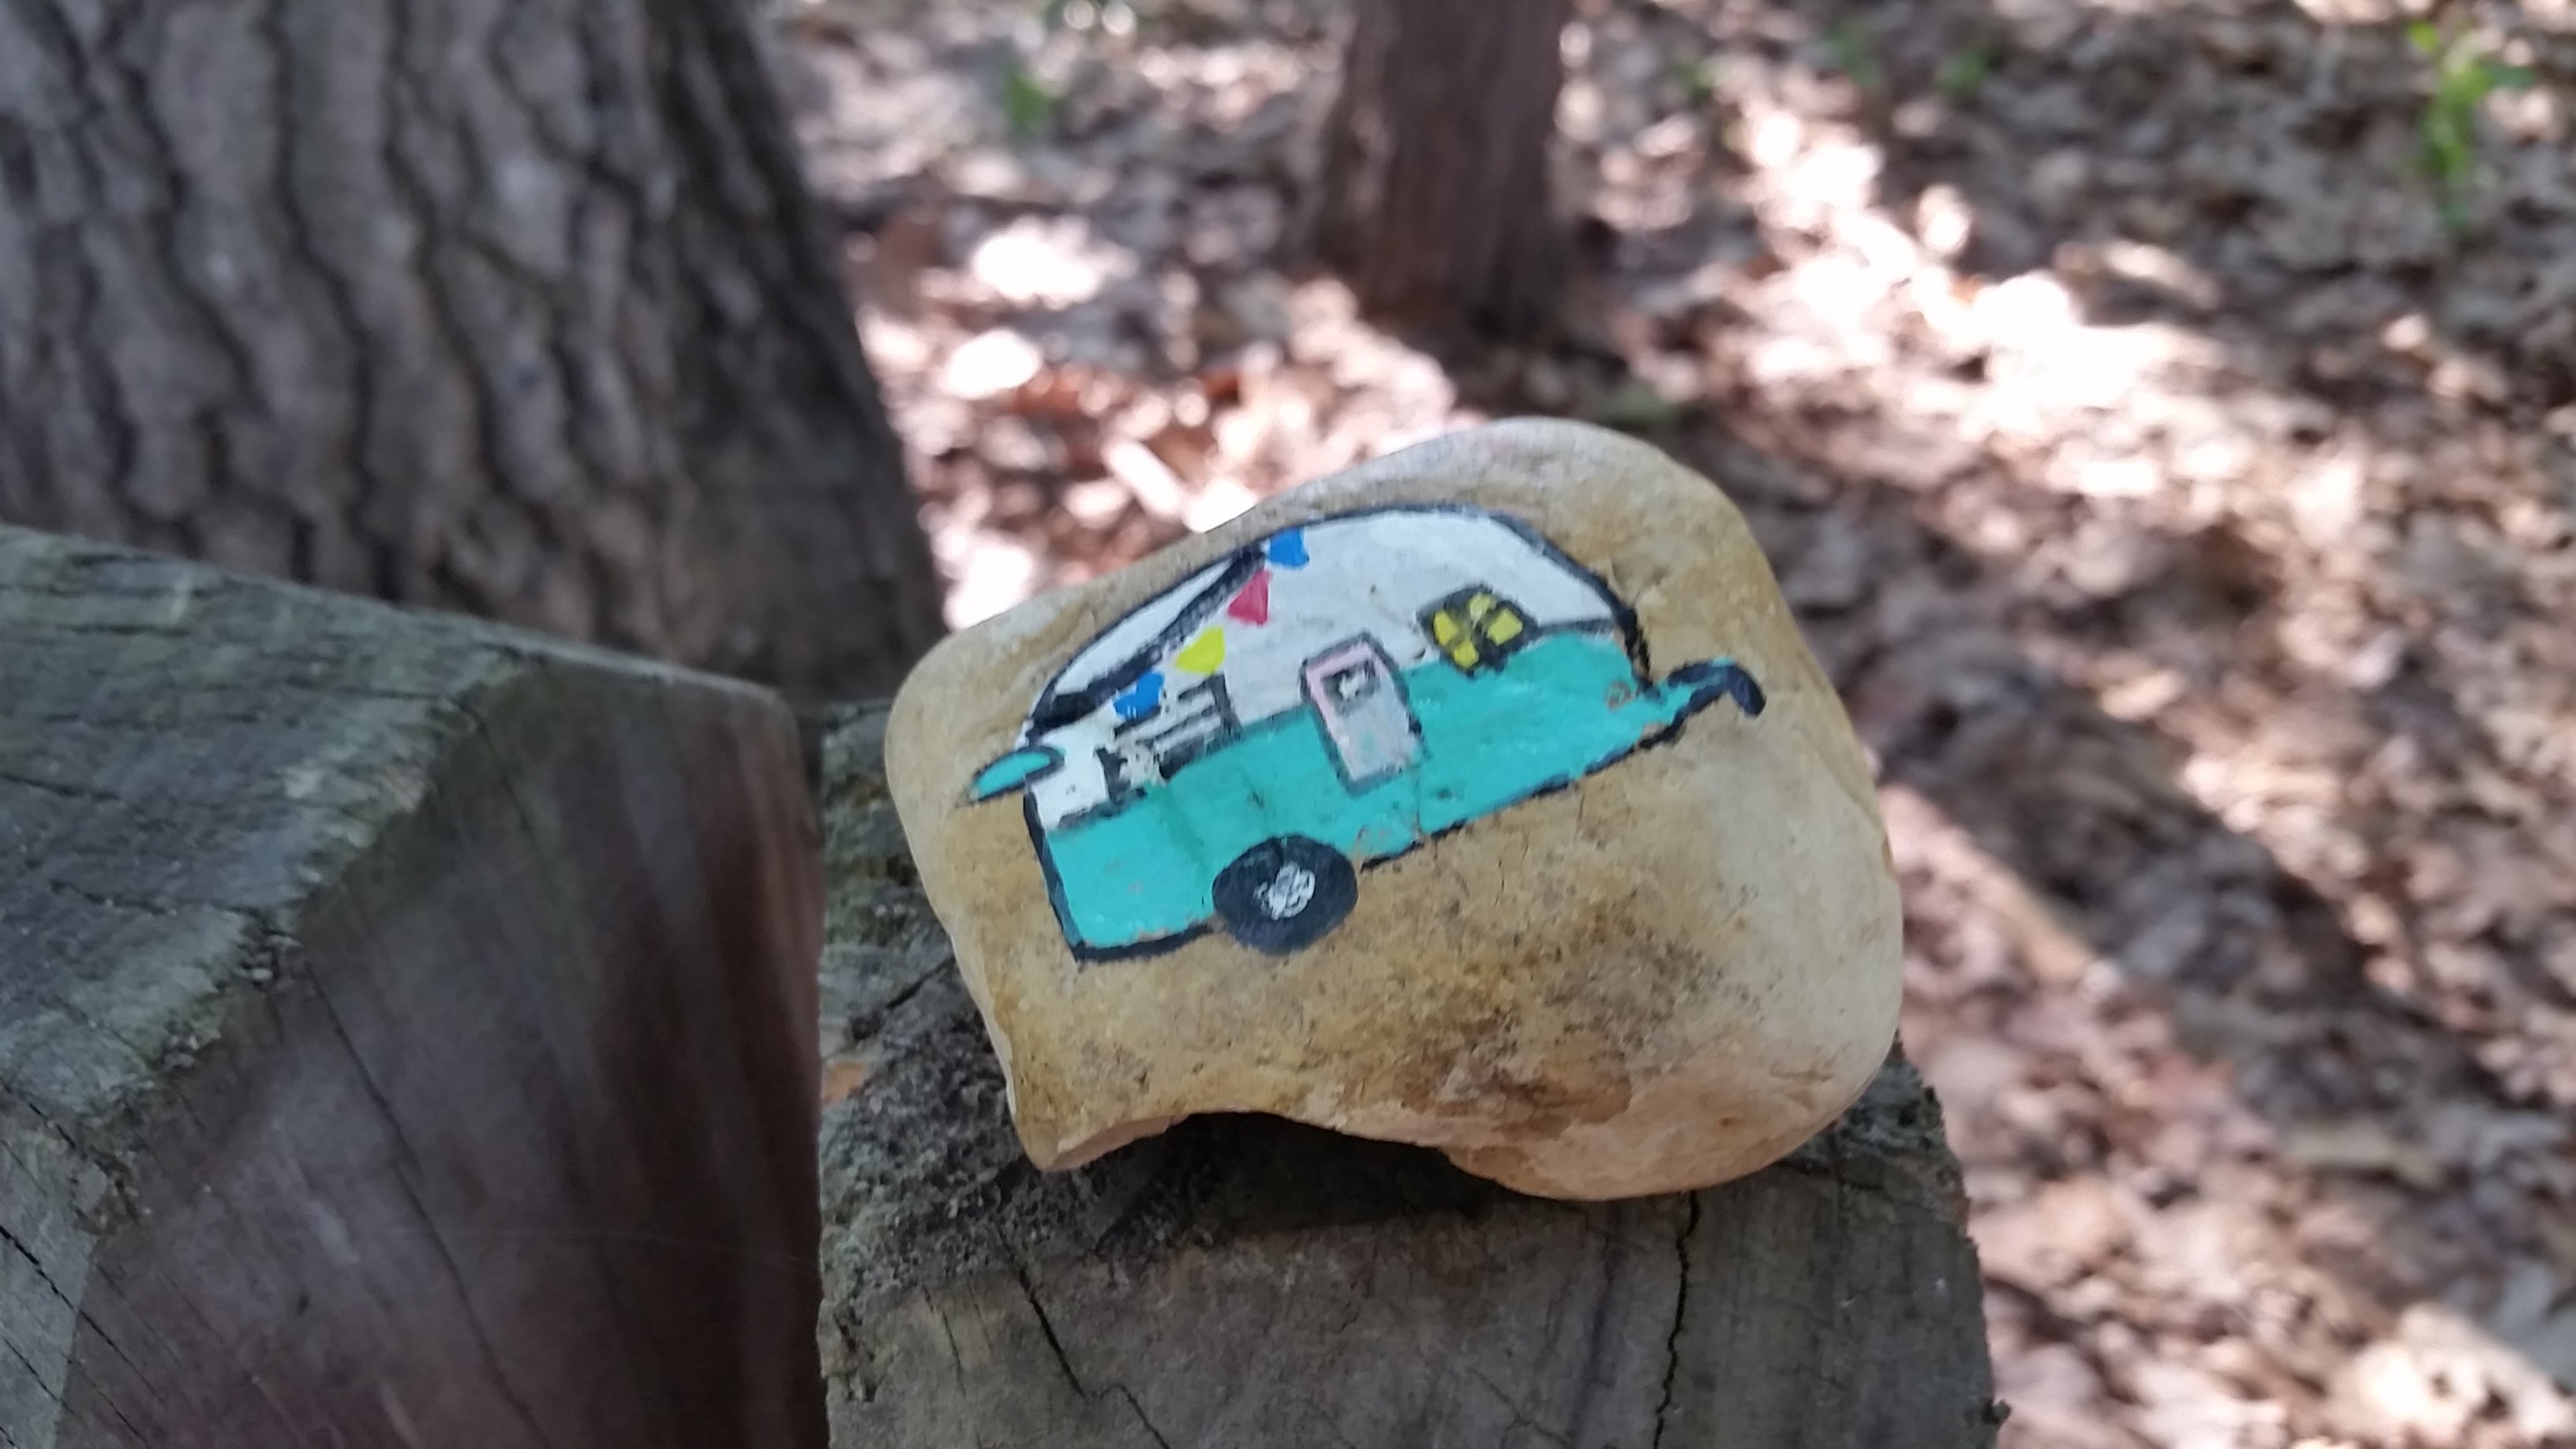 The campground hosts had a rock painting workshop. 